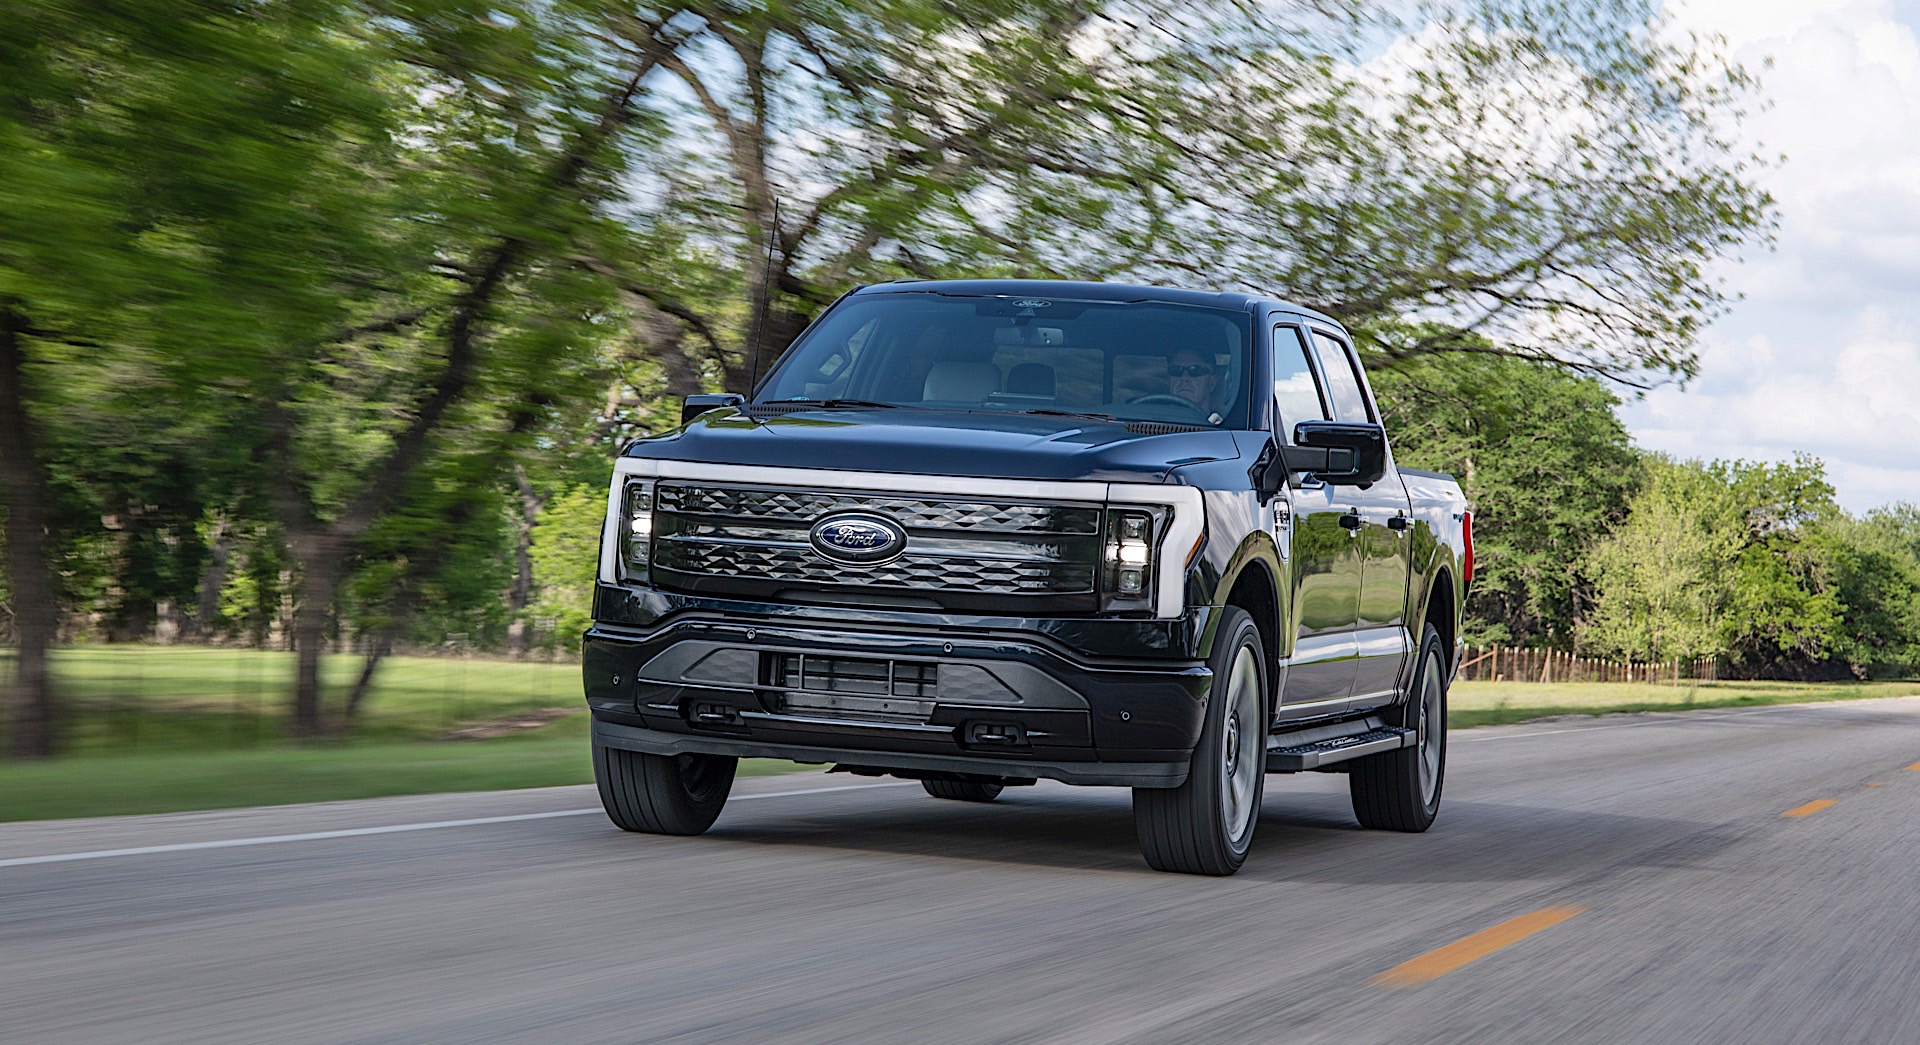 2022 Ford F150 Lightning first drive review Denis Leary would approve